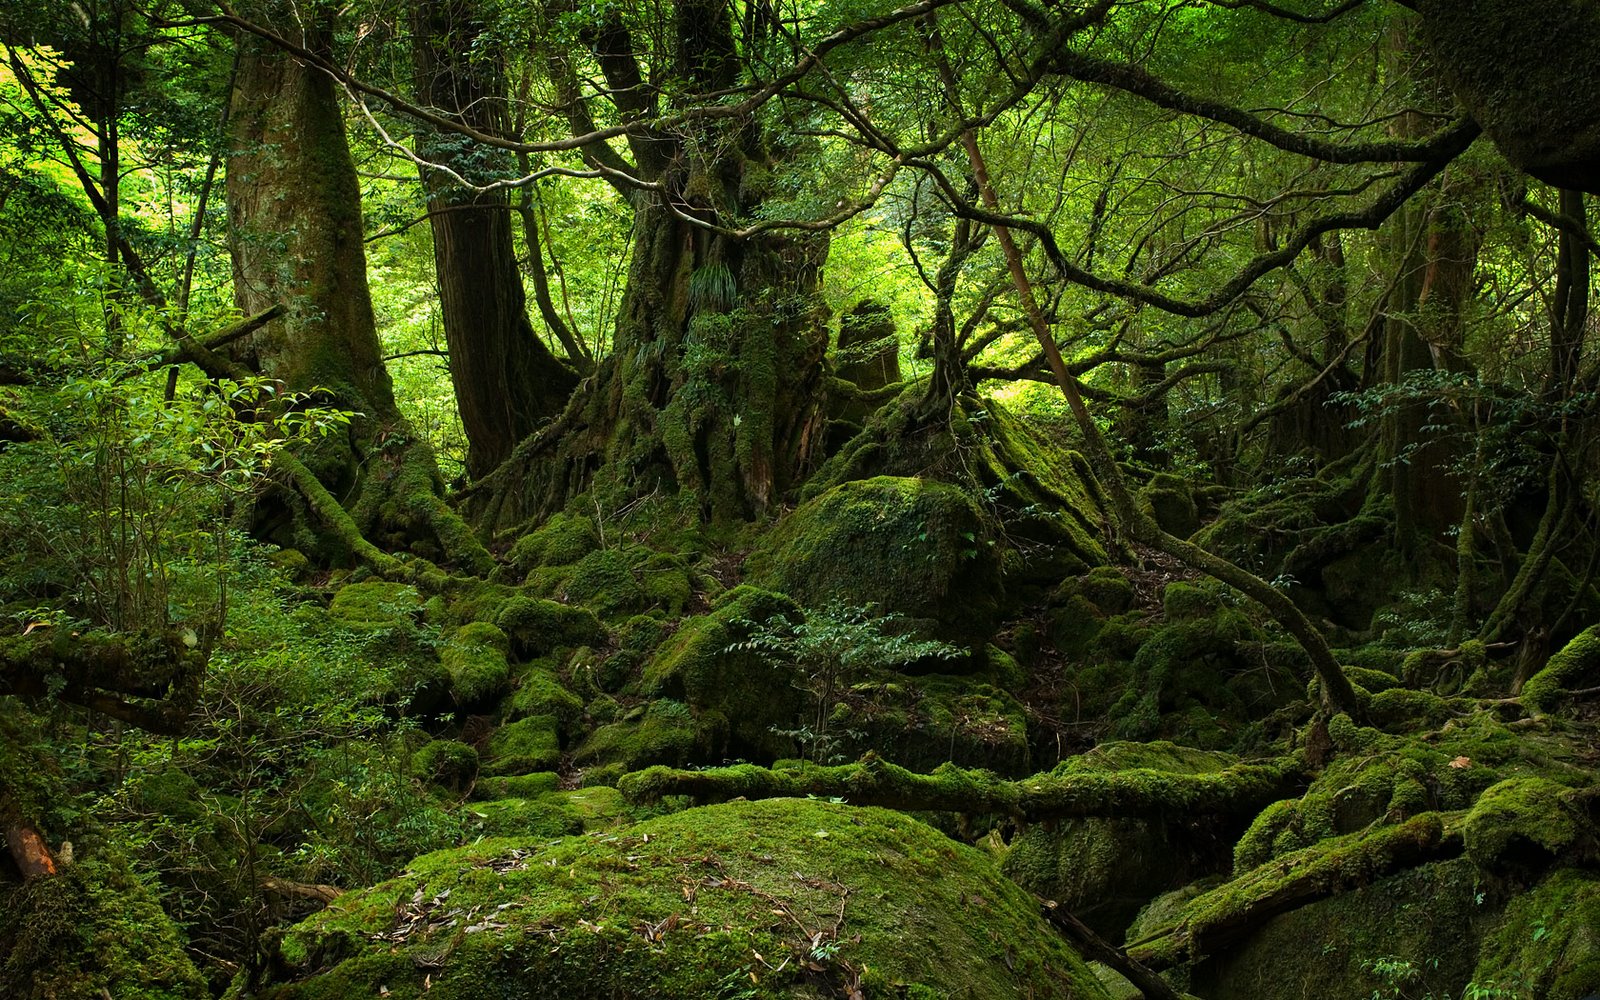 [mossy-forest-nature-axe@.jpg]